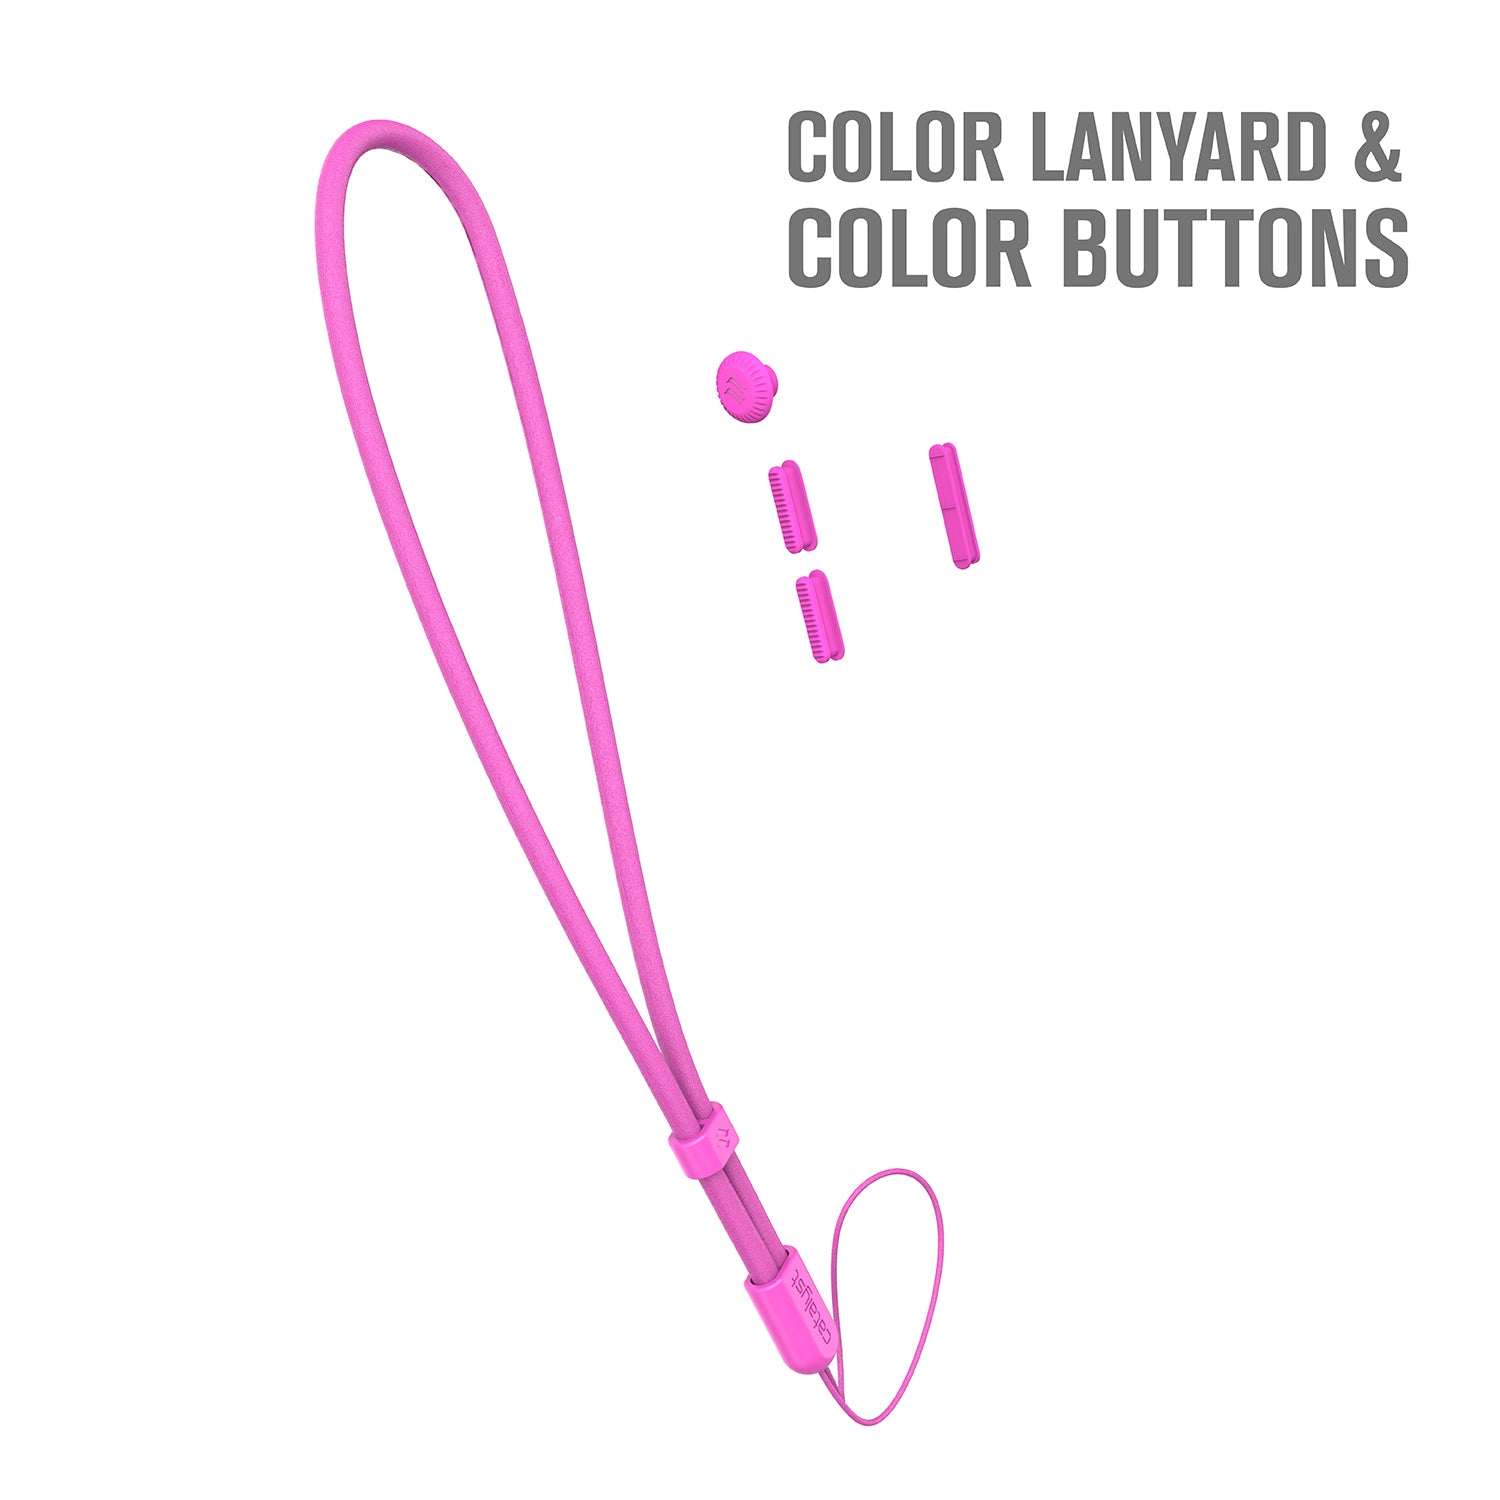 catalyst colored lanyard & buttons product itself neon pink text reads color lanyard & color buttons